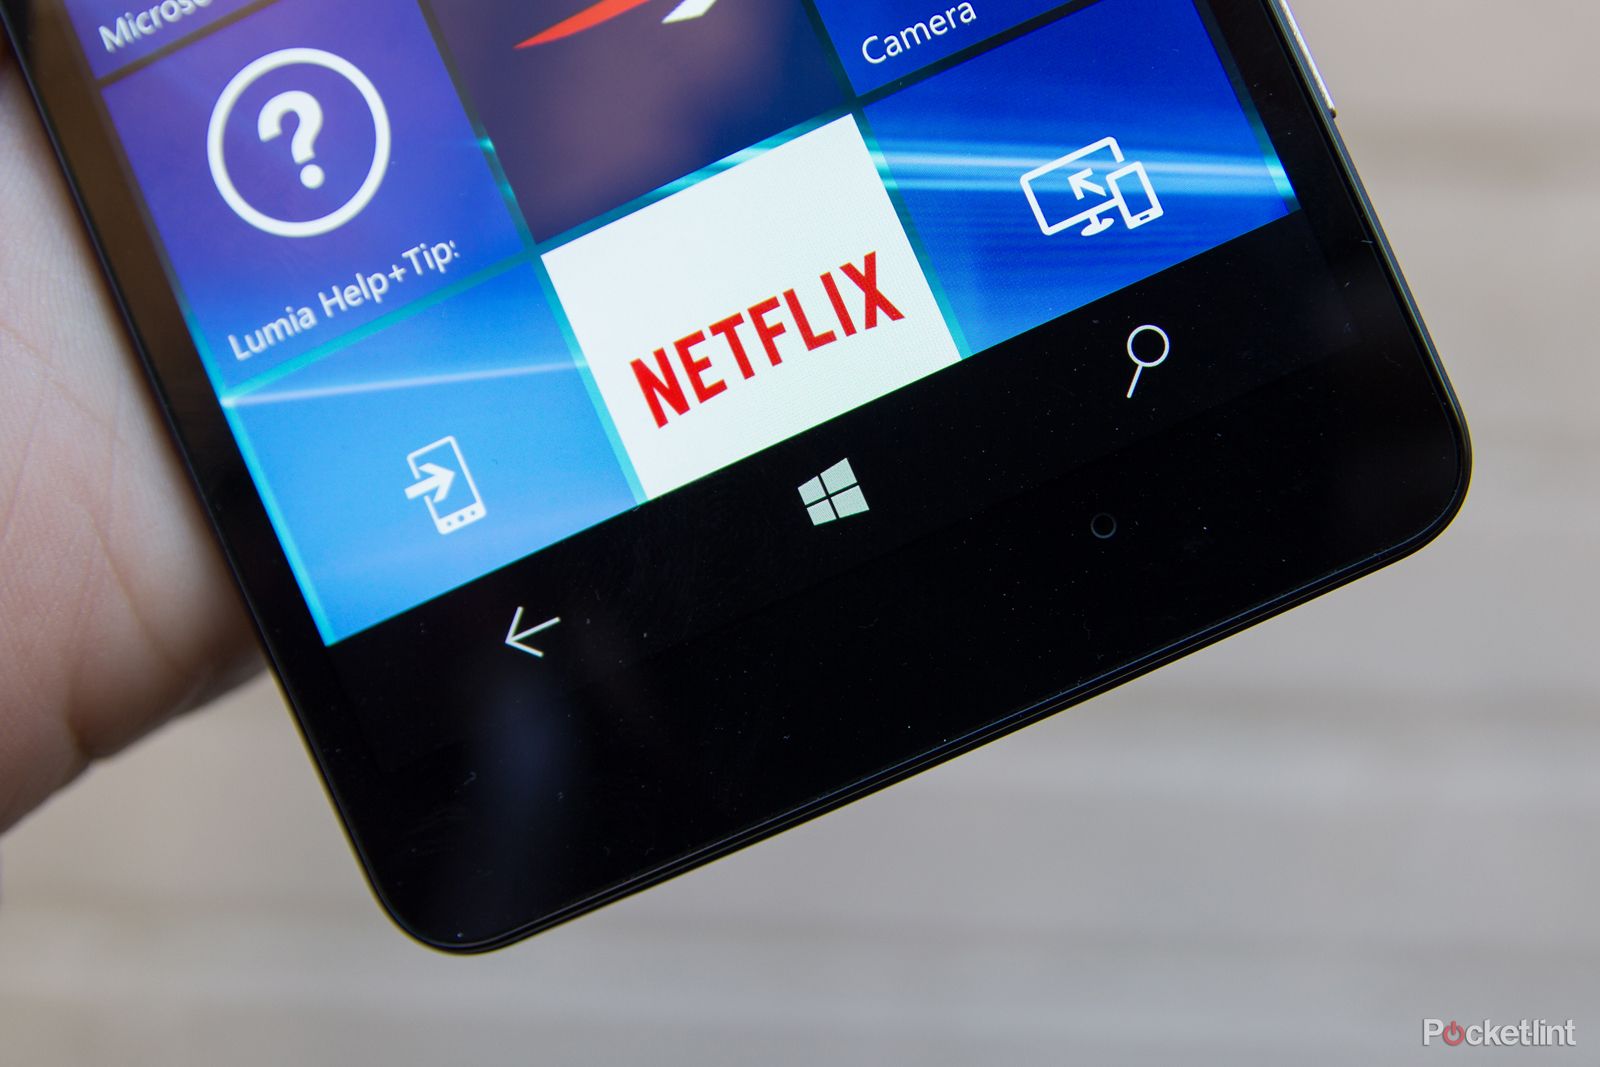 microsoft windows 10 mobile rollout which phones get it first and how  image 1